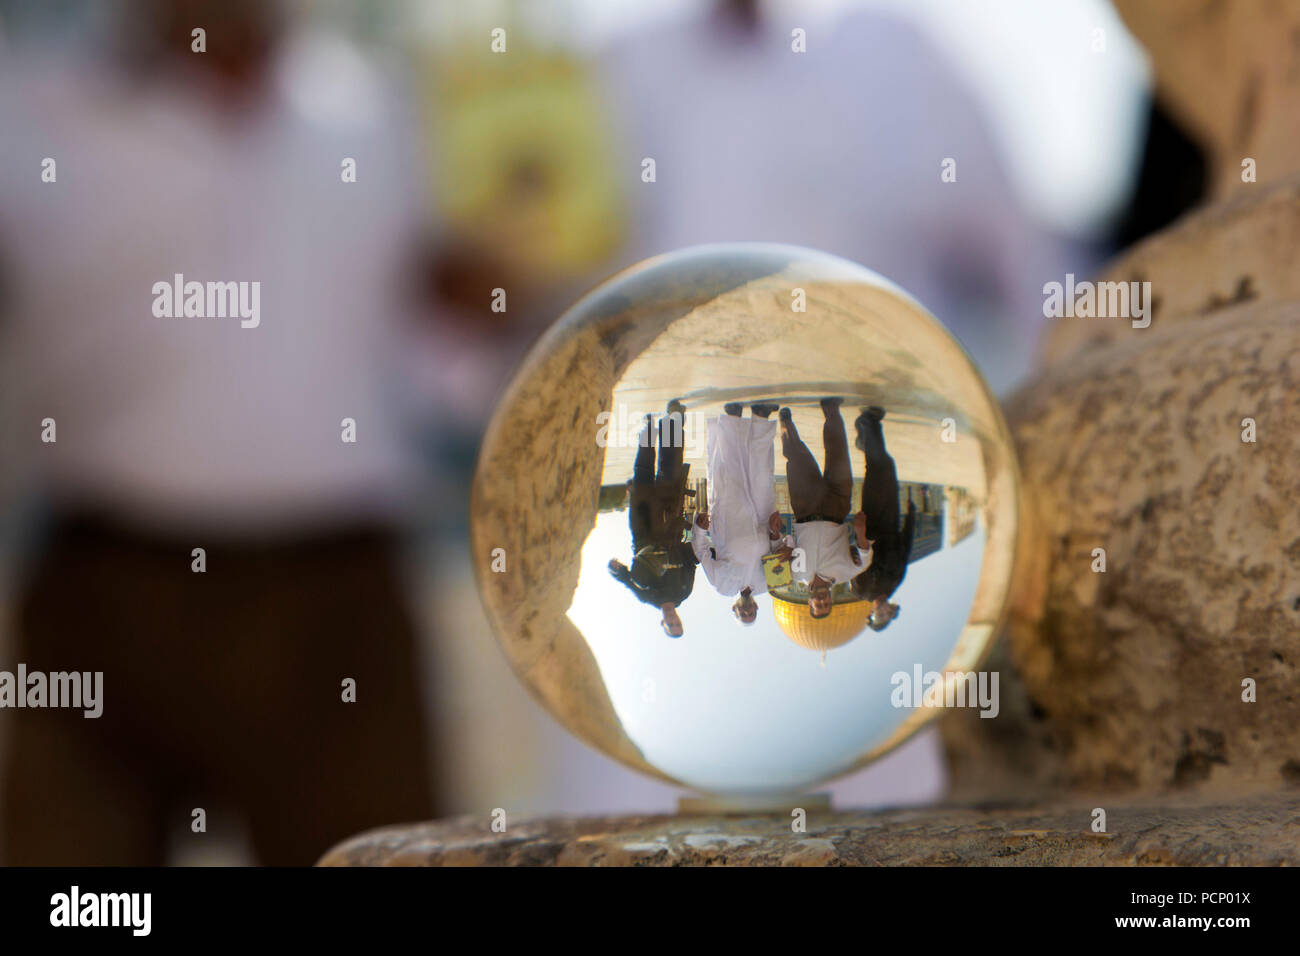 Israel, Jerusalem, Muslims under arrest in front of Dome of the Rock, in glass ball Stock Photo